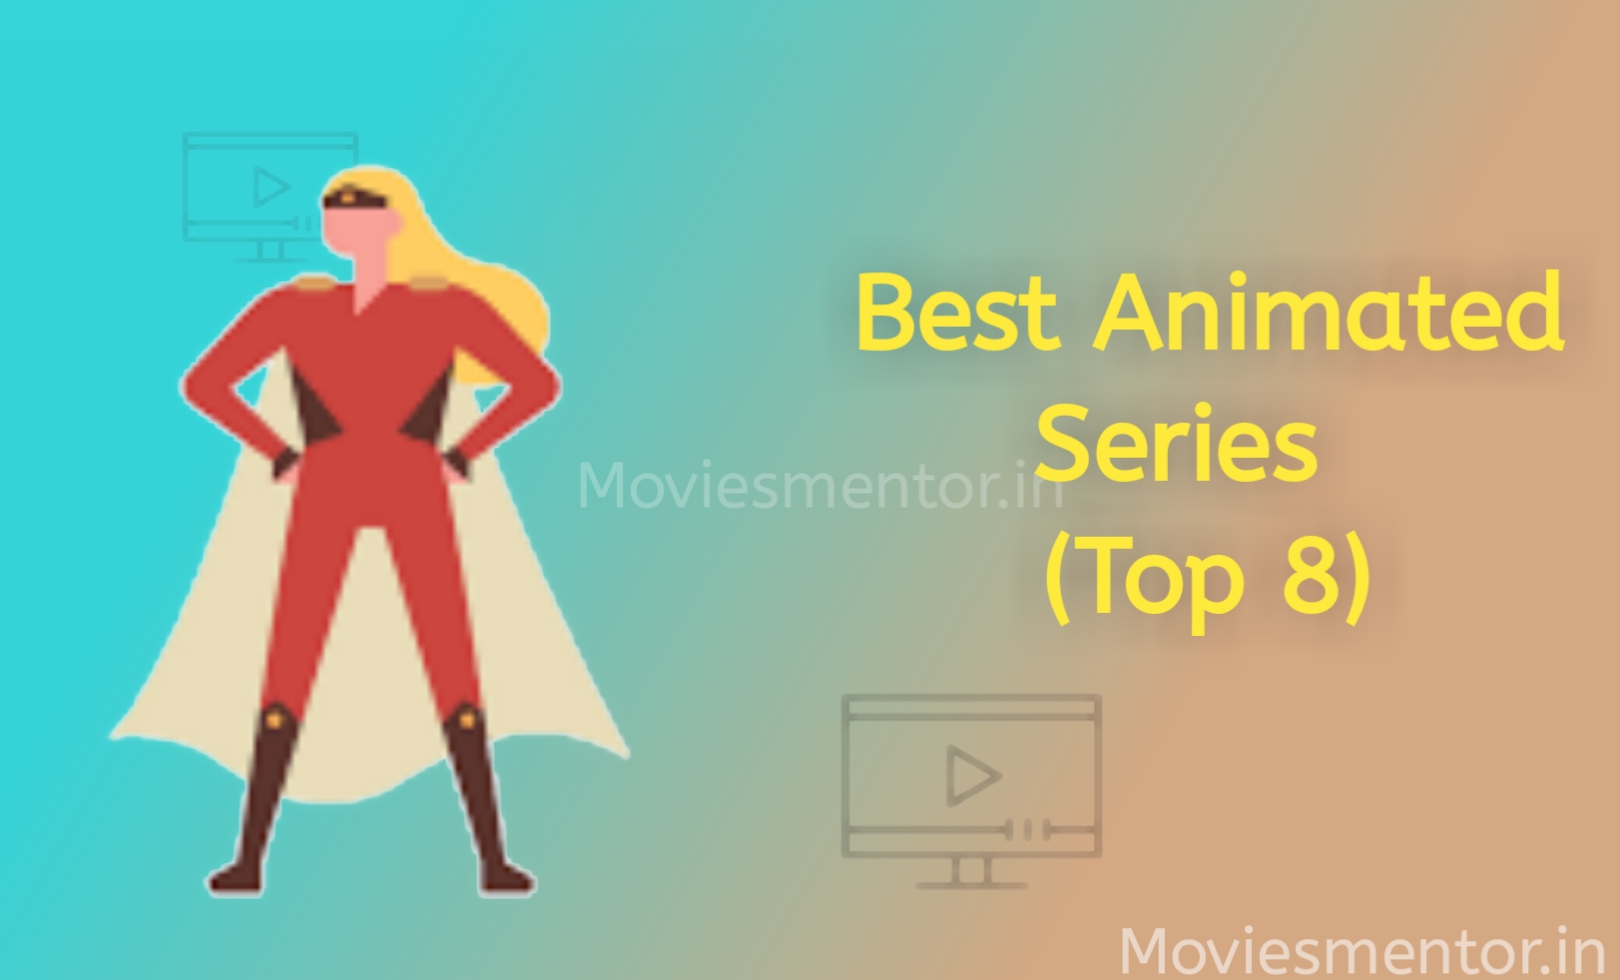 Best Animated Series (Top 8)